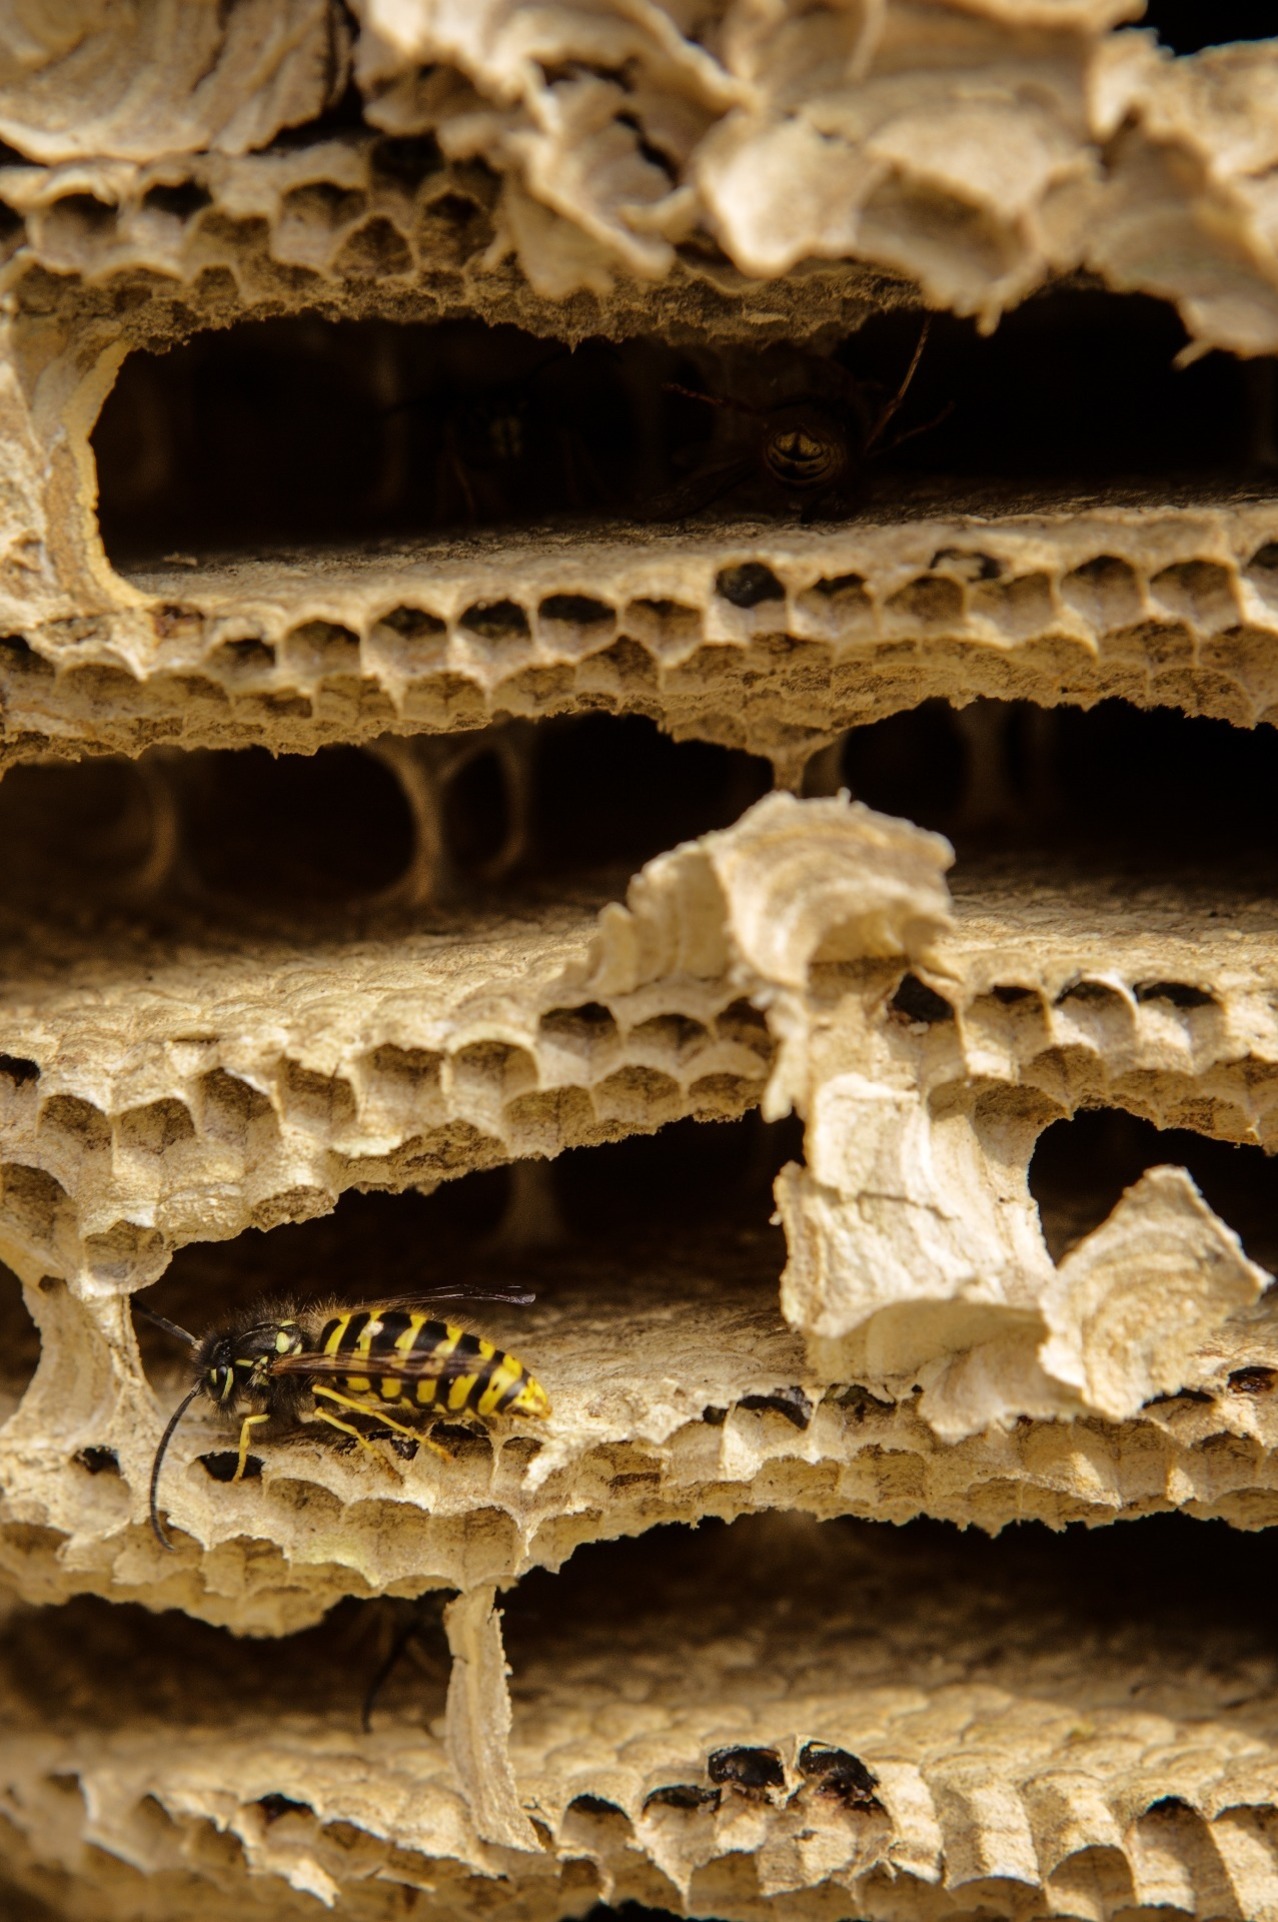 the inside of a wasp nest